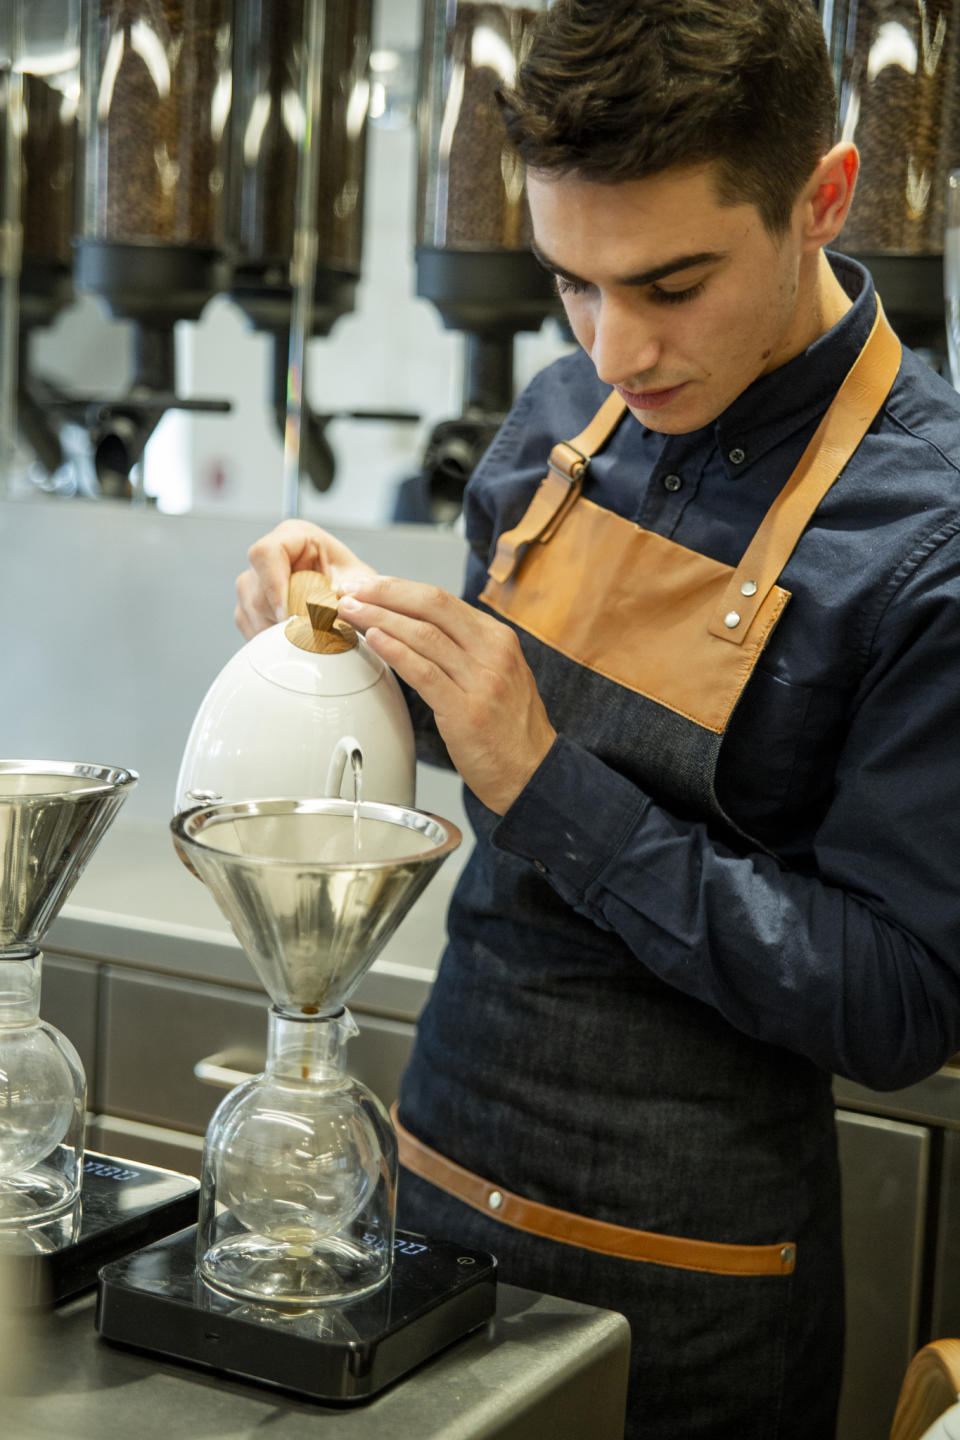 Eight different types of coffee are served at La Manufacture Alain Ducasse near Bastille.